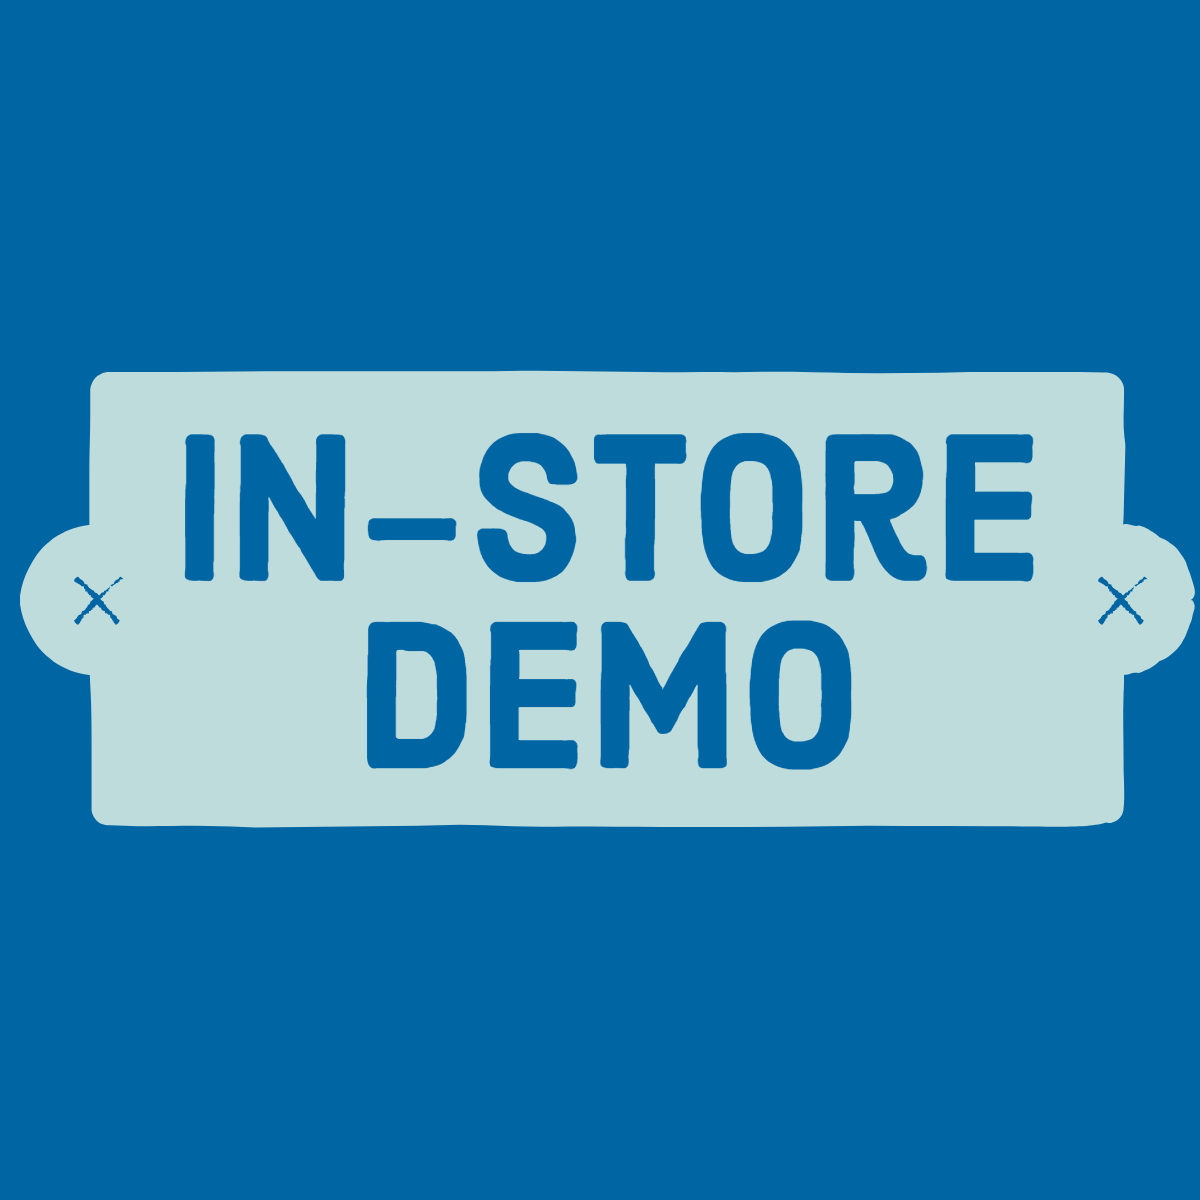 In-Store Demos graphic